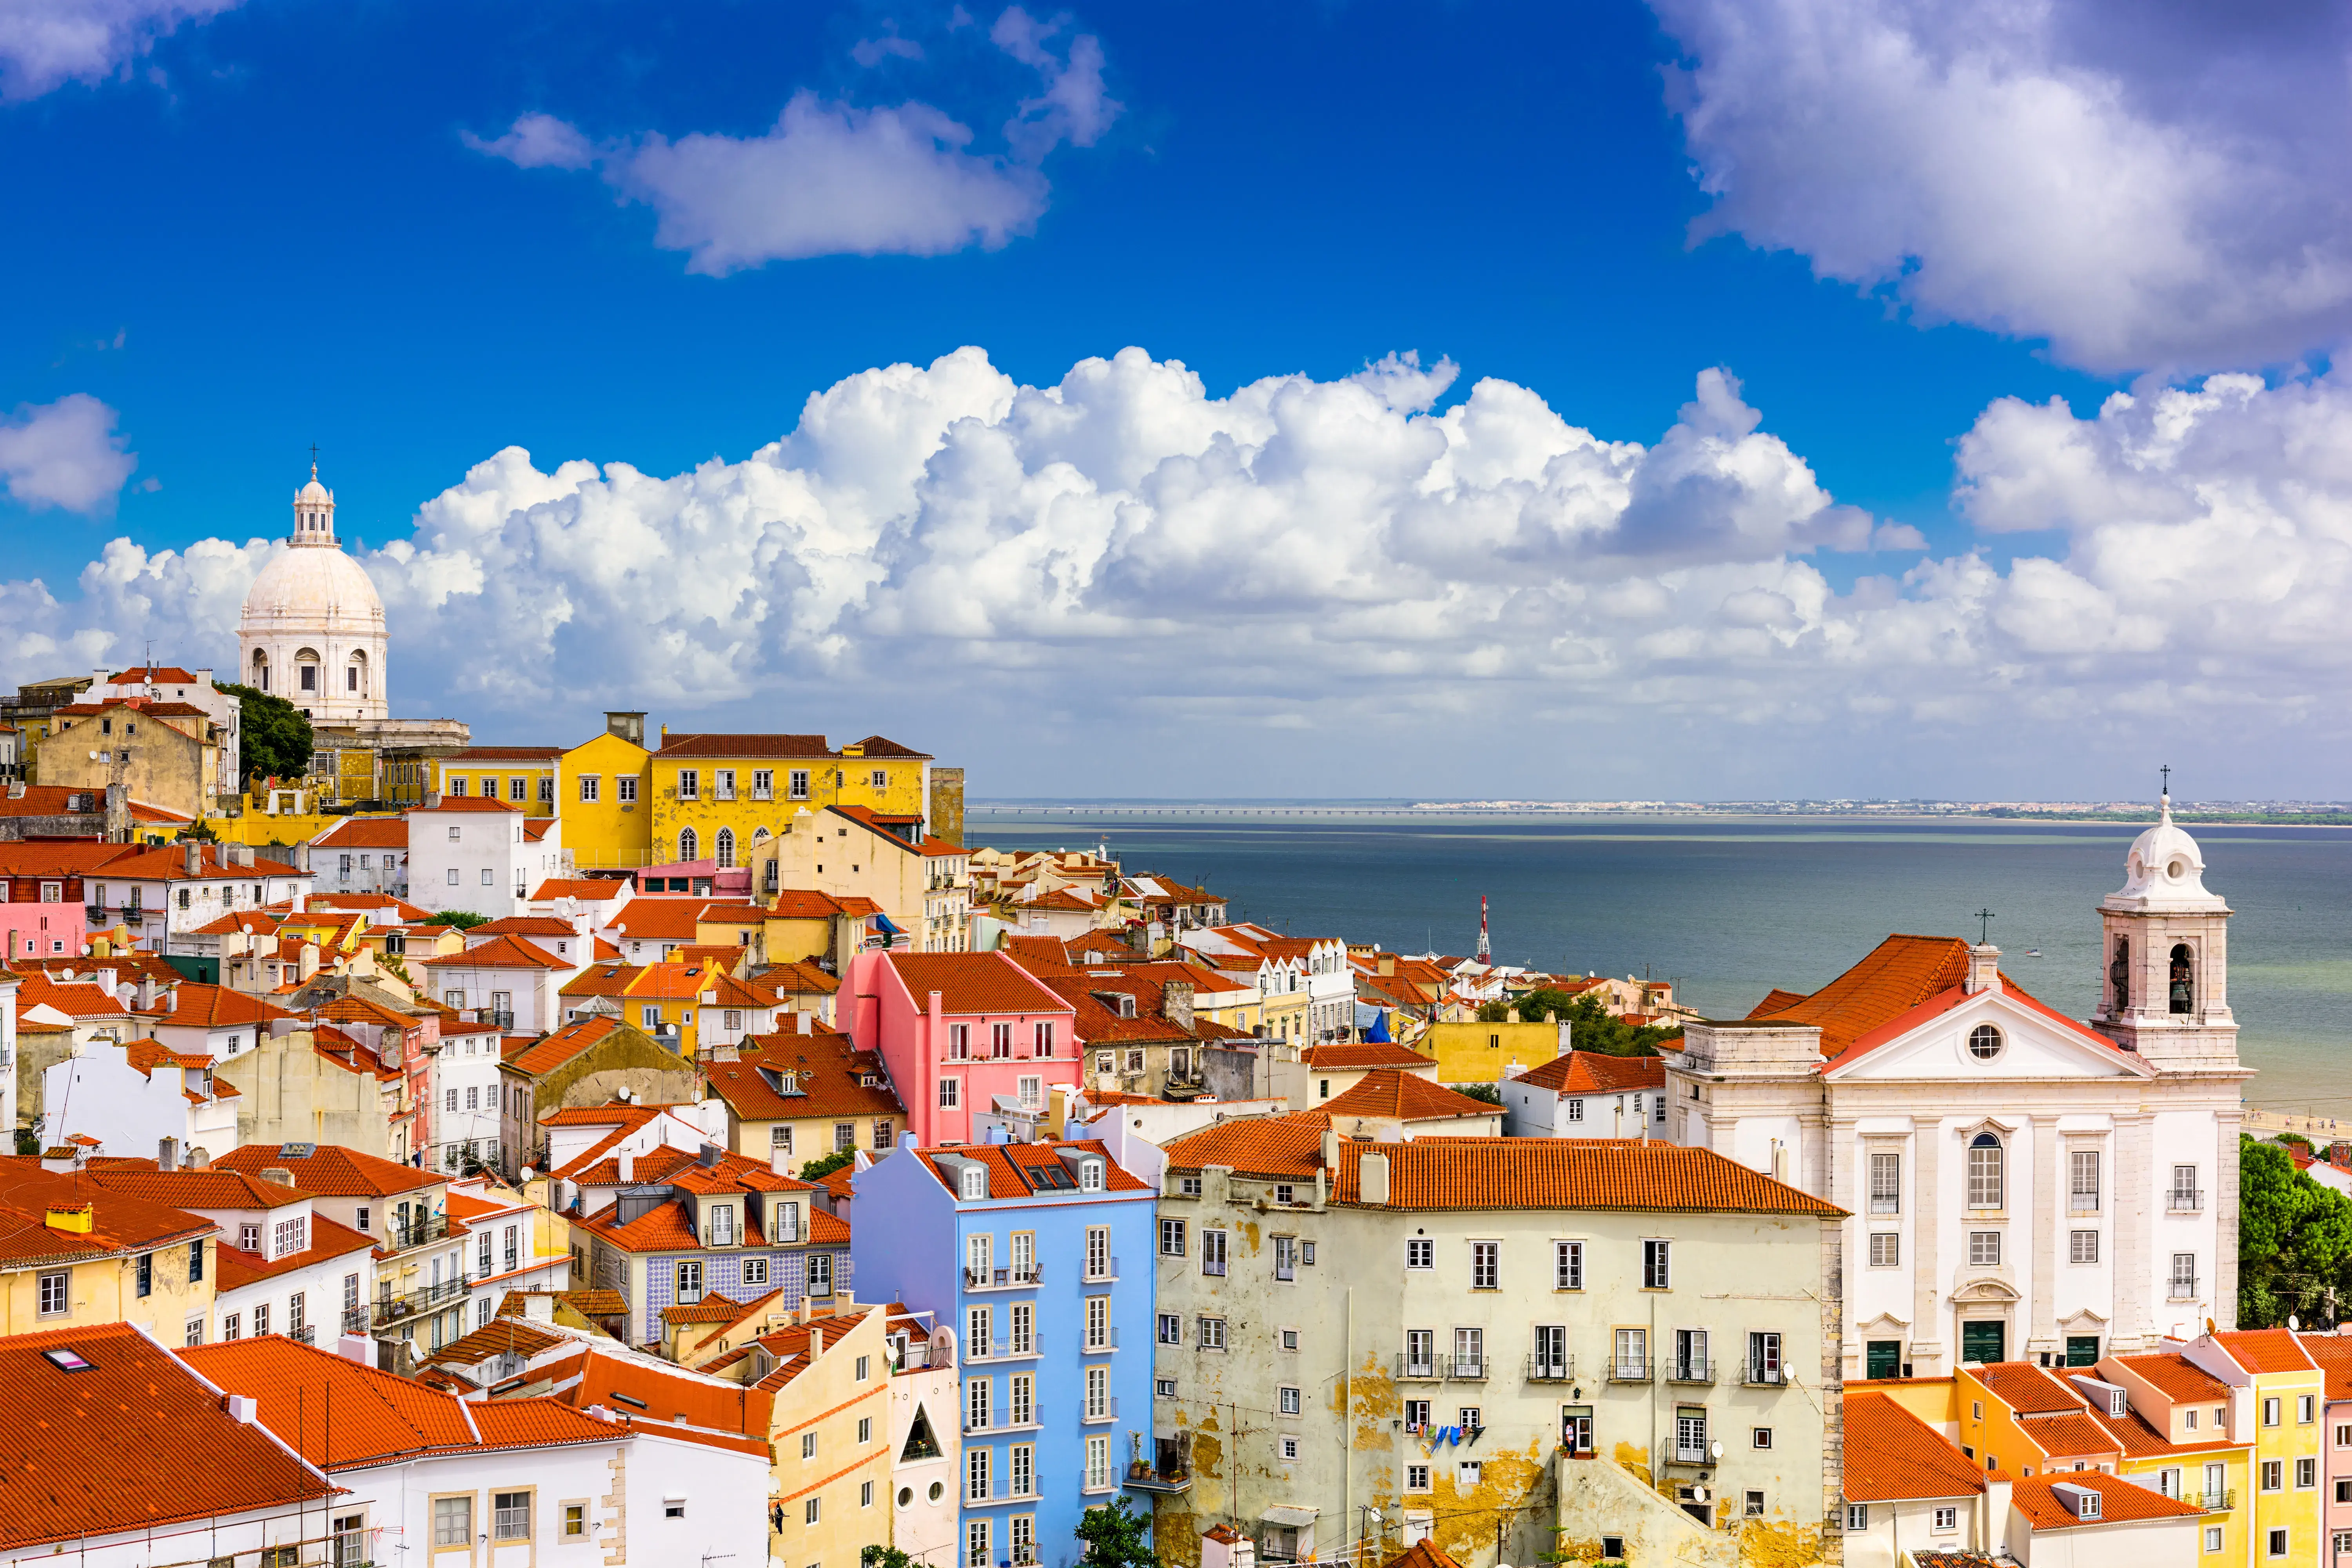 A large town in Portugal sitting next to a large body of water